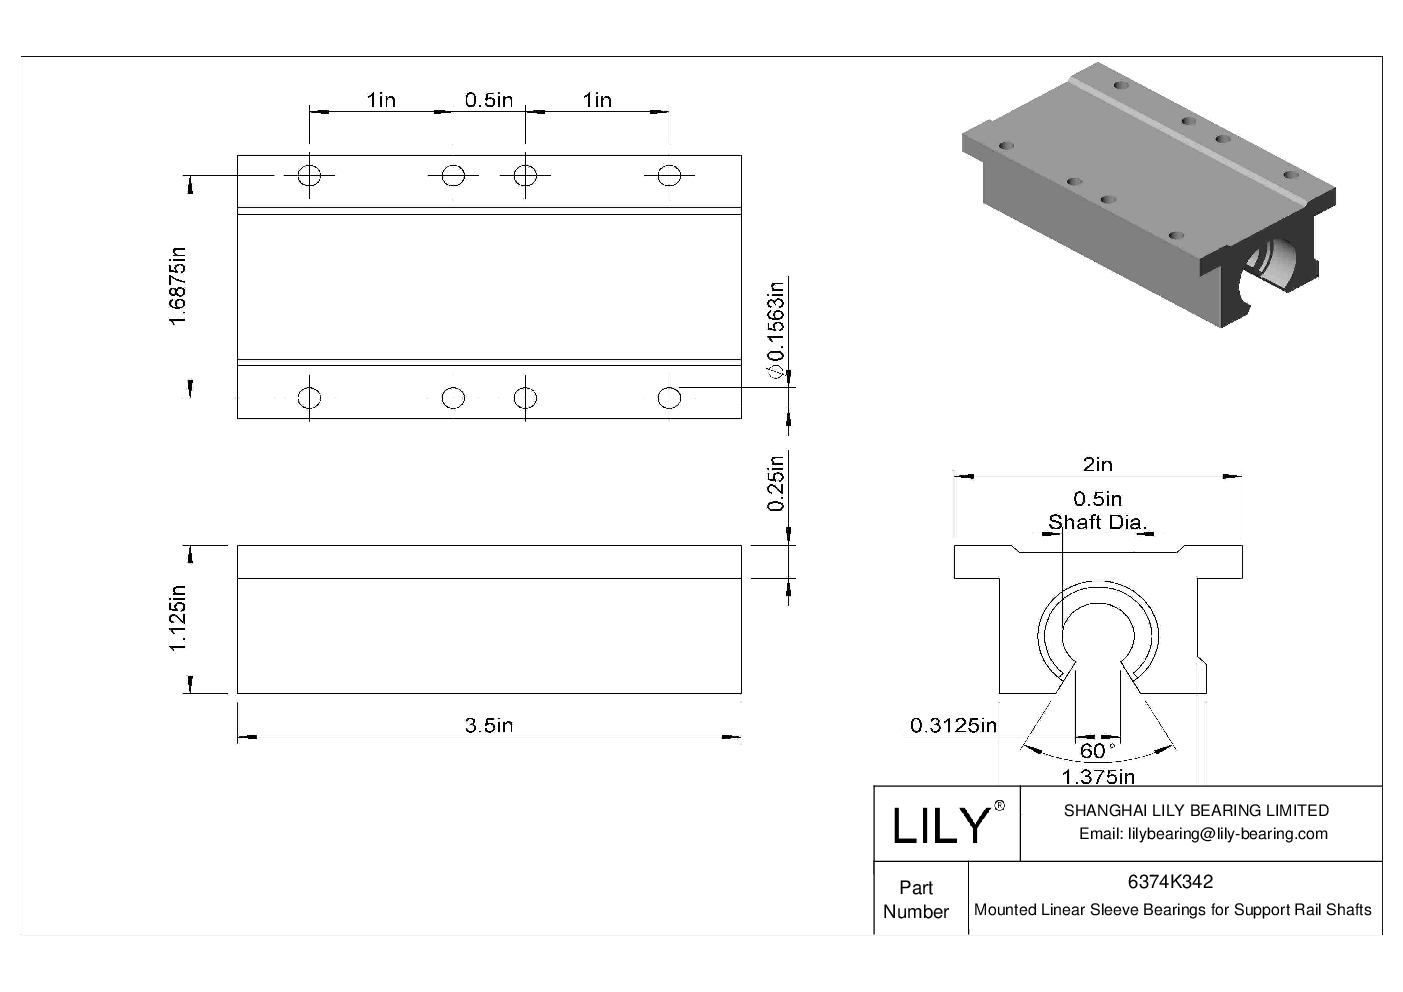 GDHEKDEC Common Mounted Linear Sleeve Bearings for Support Rail Shafts cad drawing